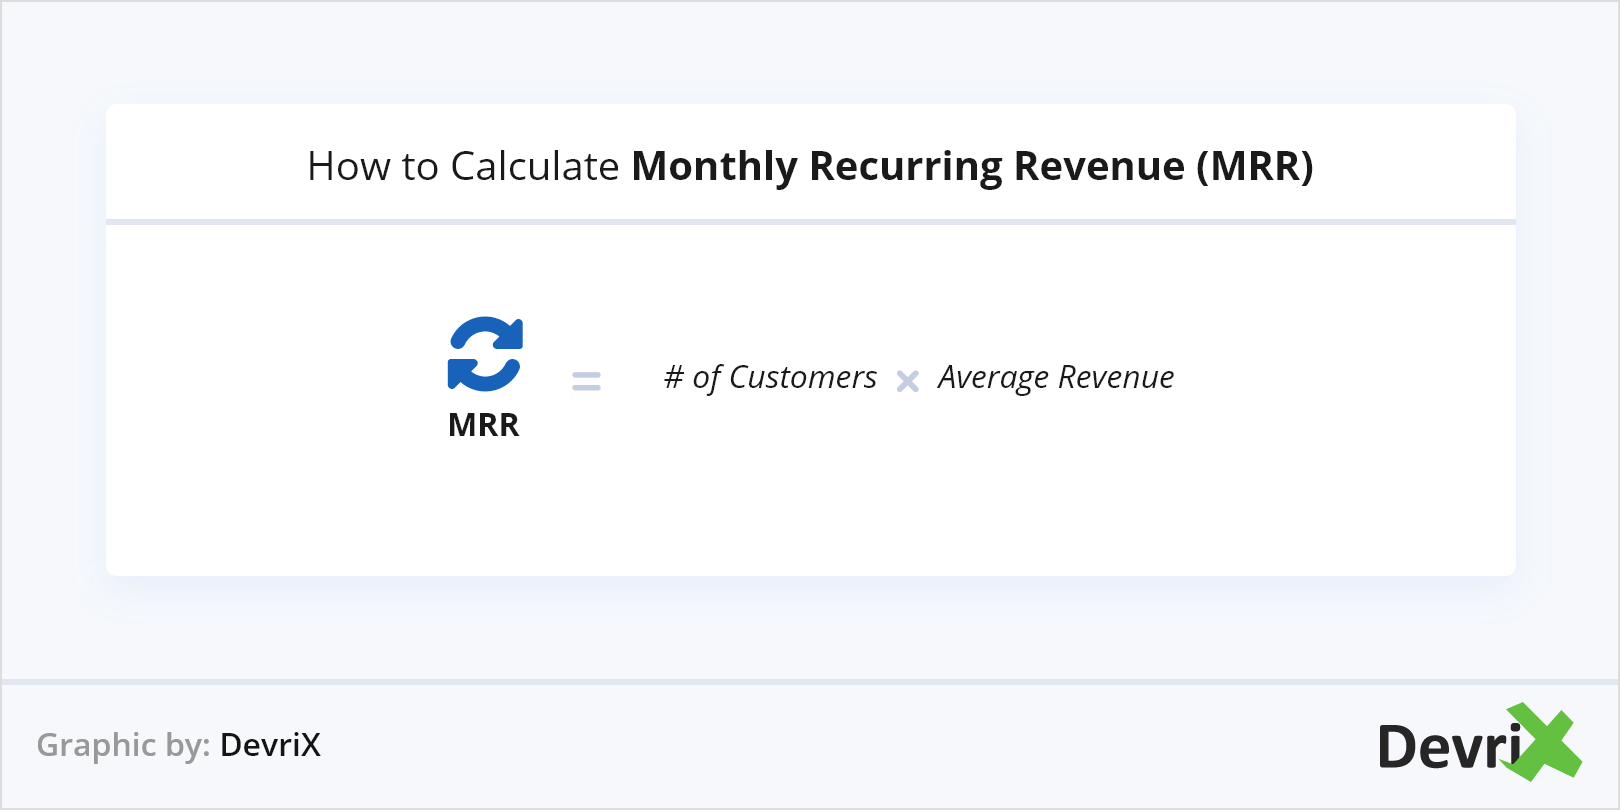 How to Calculate Monthly Recurring Revenue (MRR)